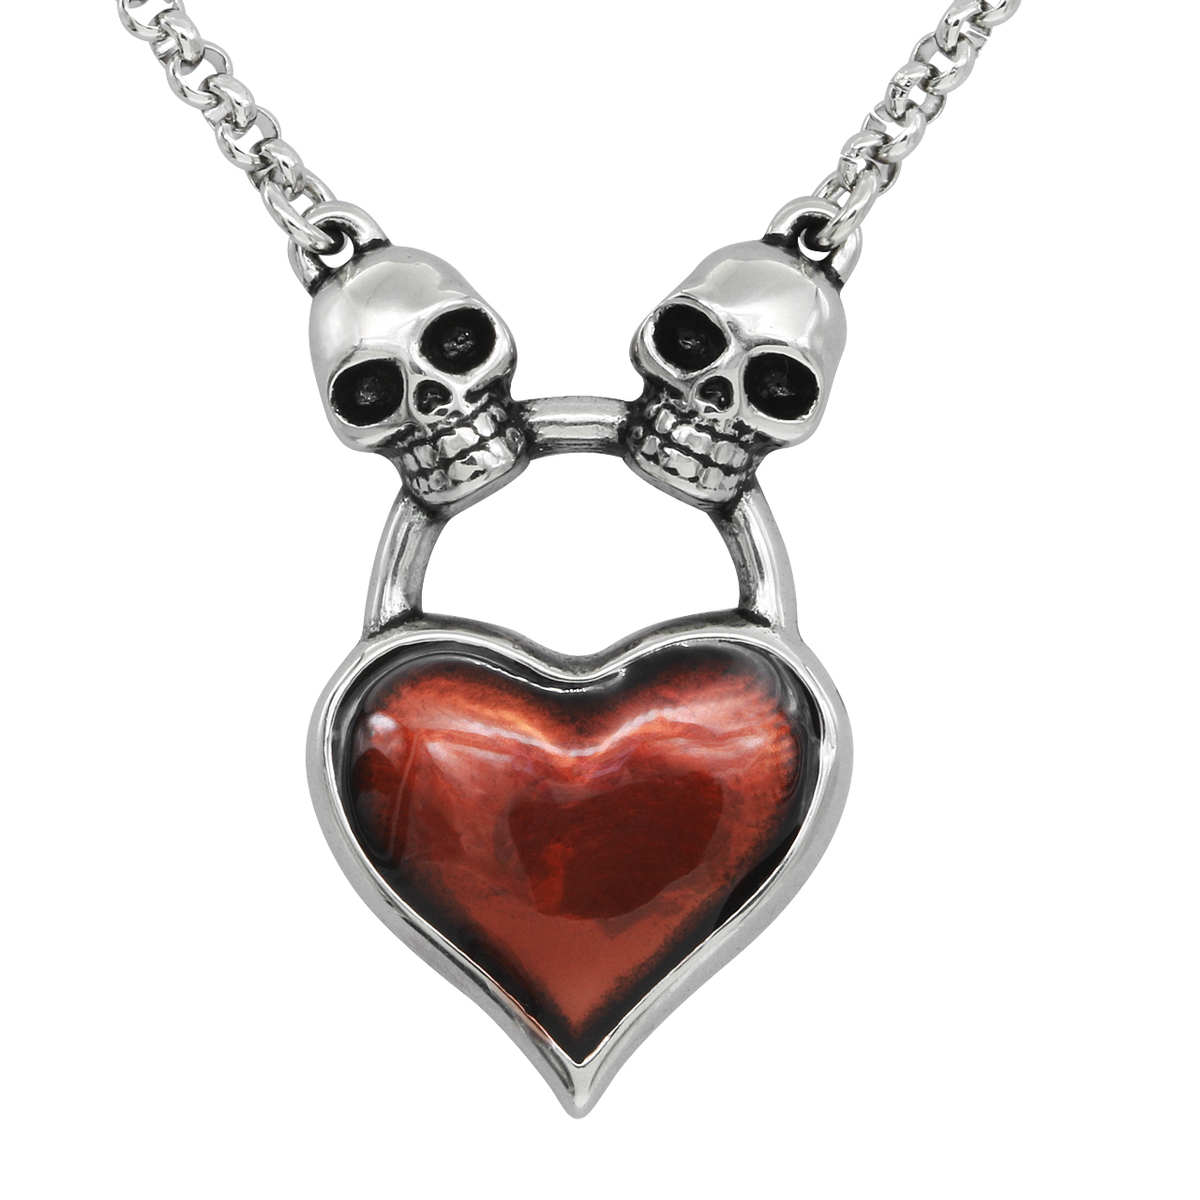 Skull Heart Necklace - Pure Hearts Will Find You